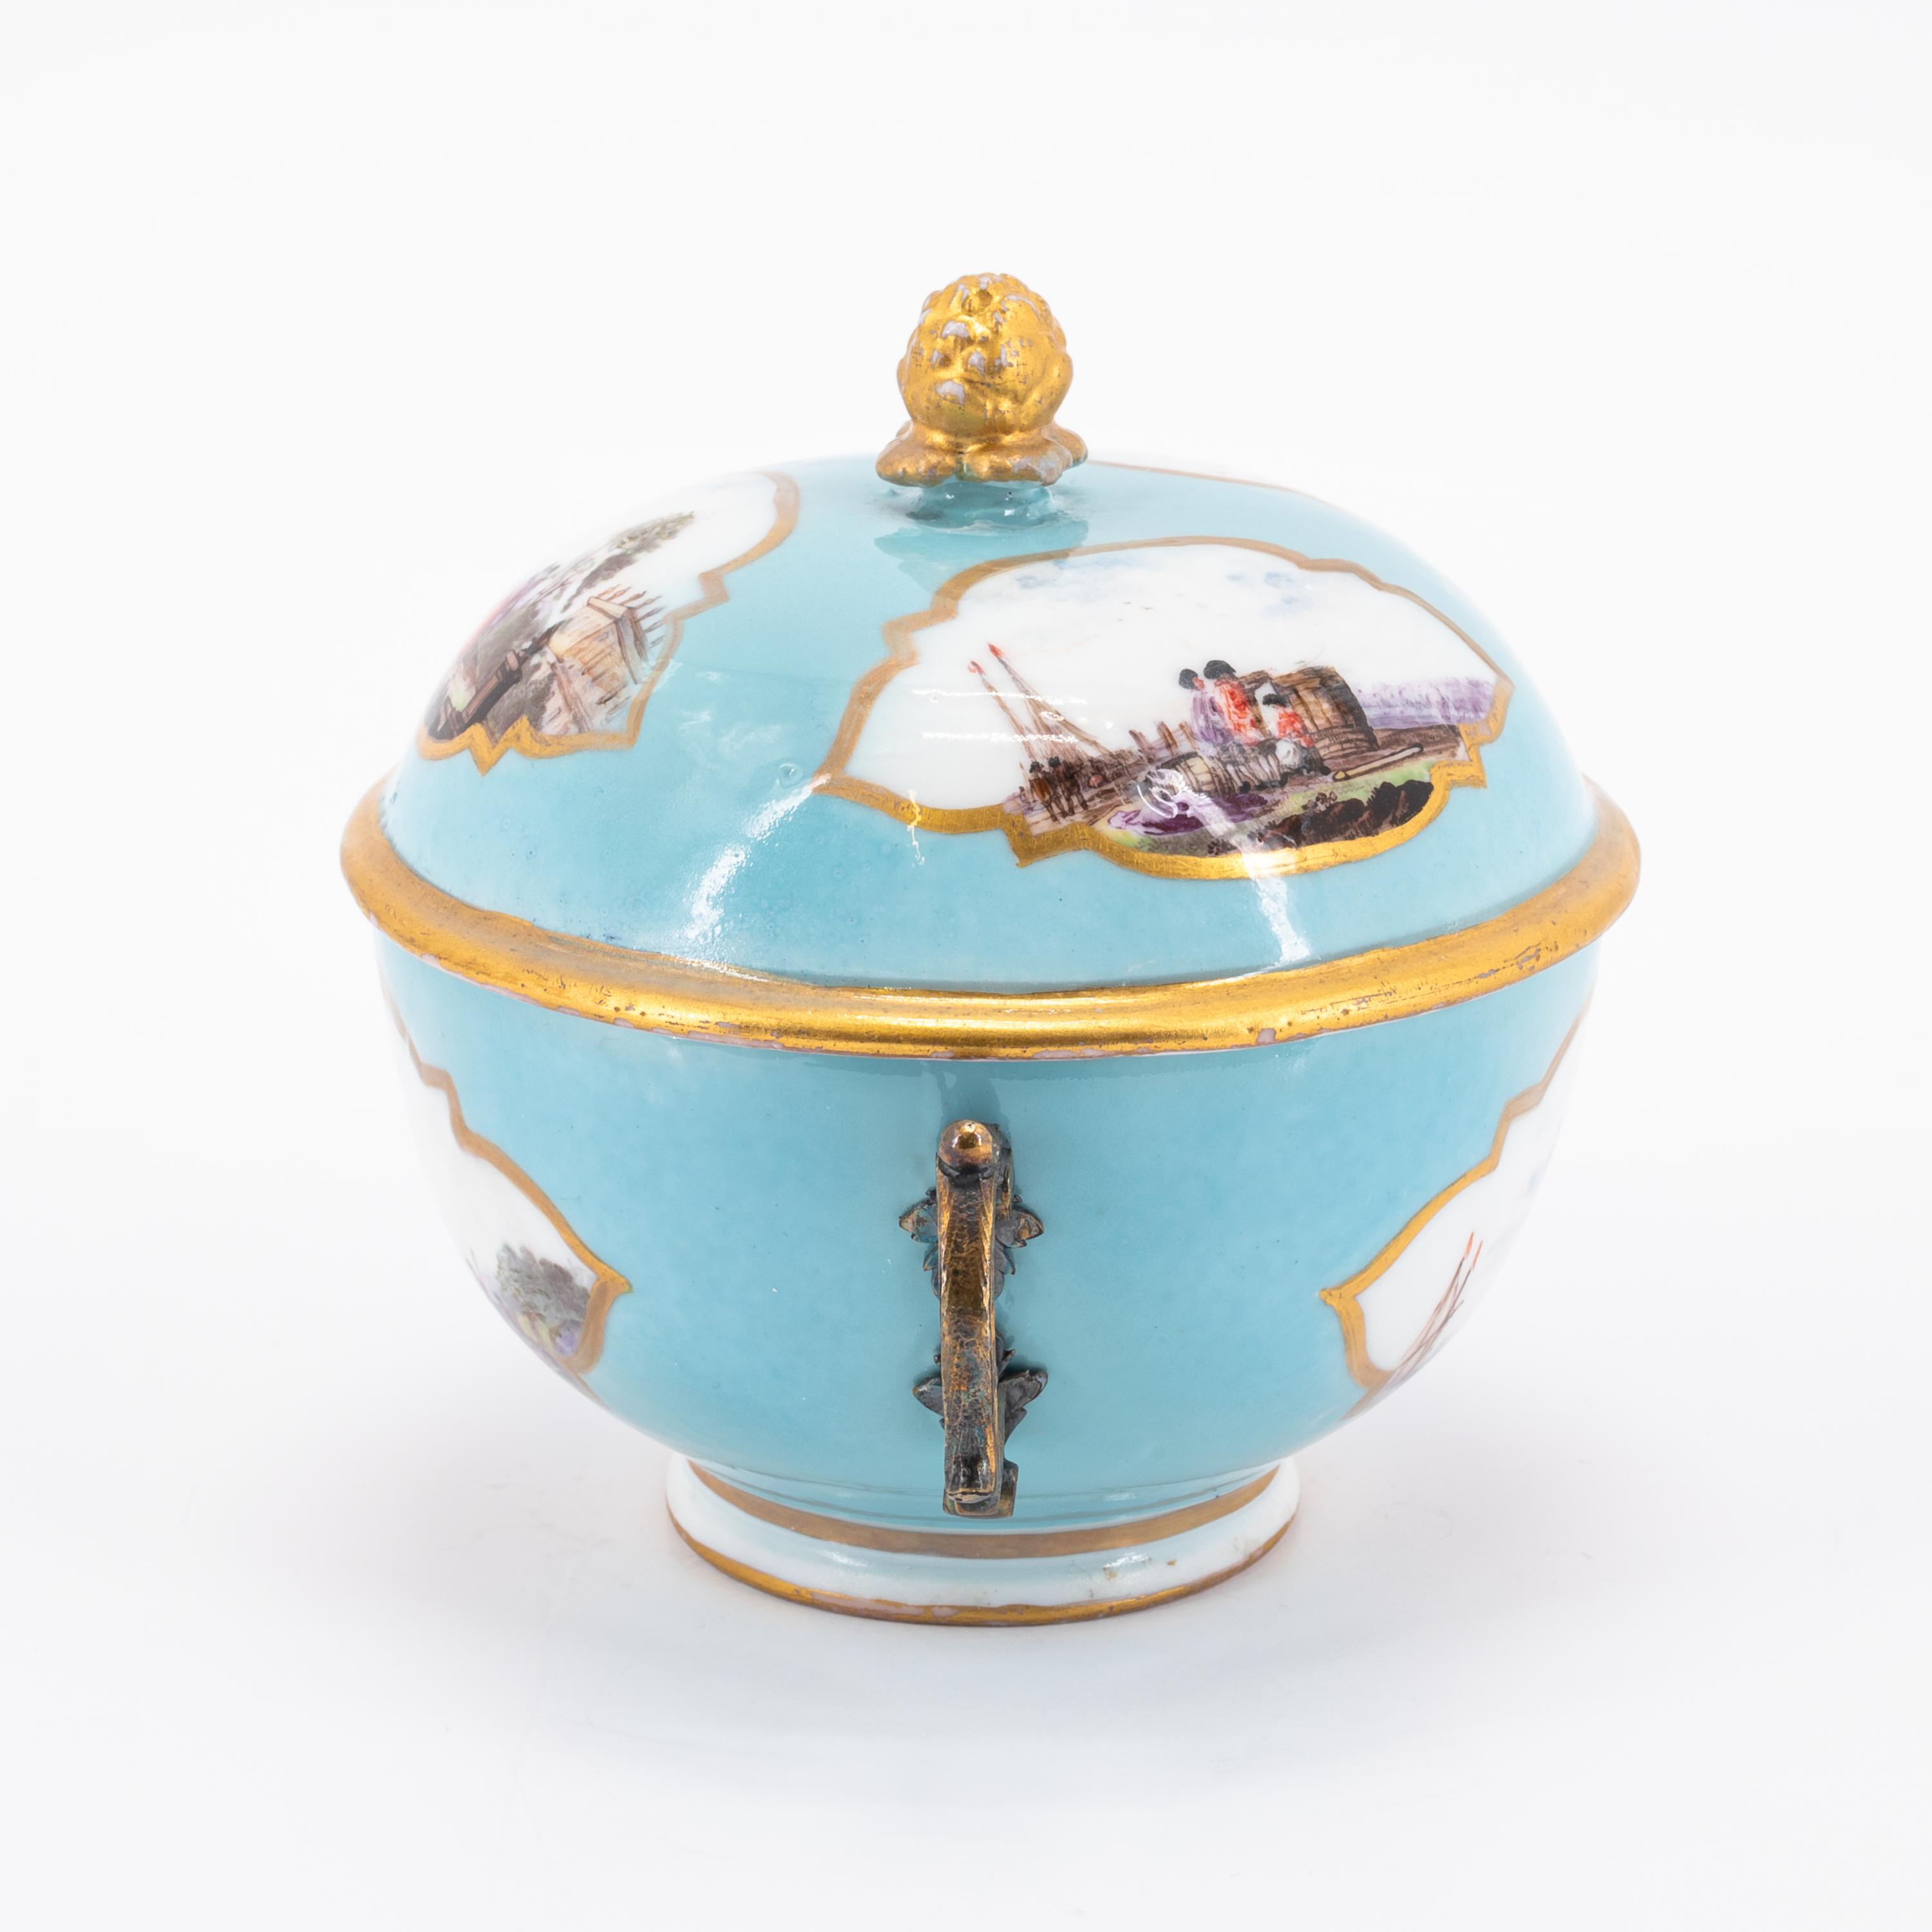 SMALL PORCELAIN TUREEN AND SAUCER WITH TURQUOISE BACKGROUND AND MERCHANT'S NAVY SCENES - Image 6 of 8